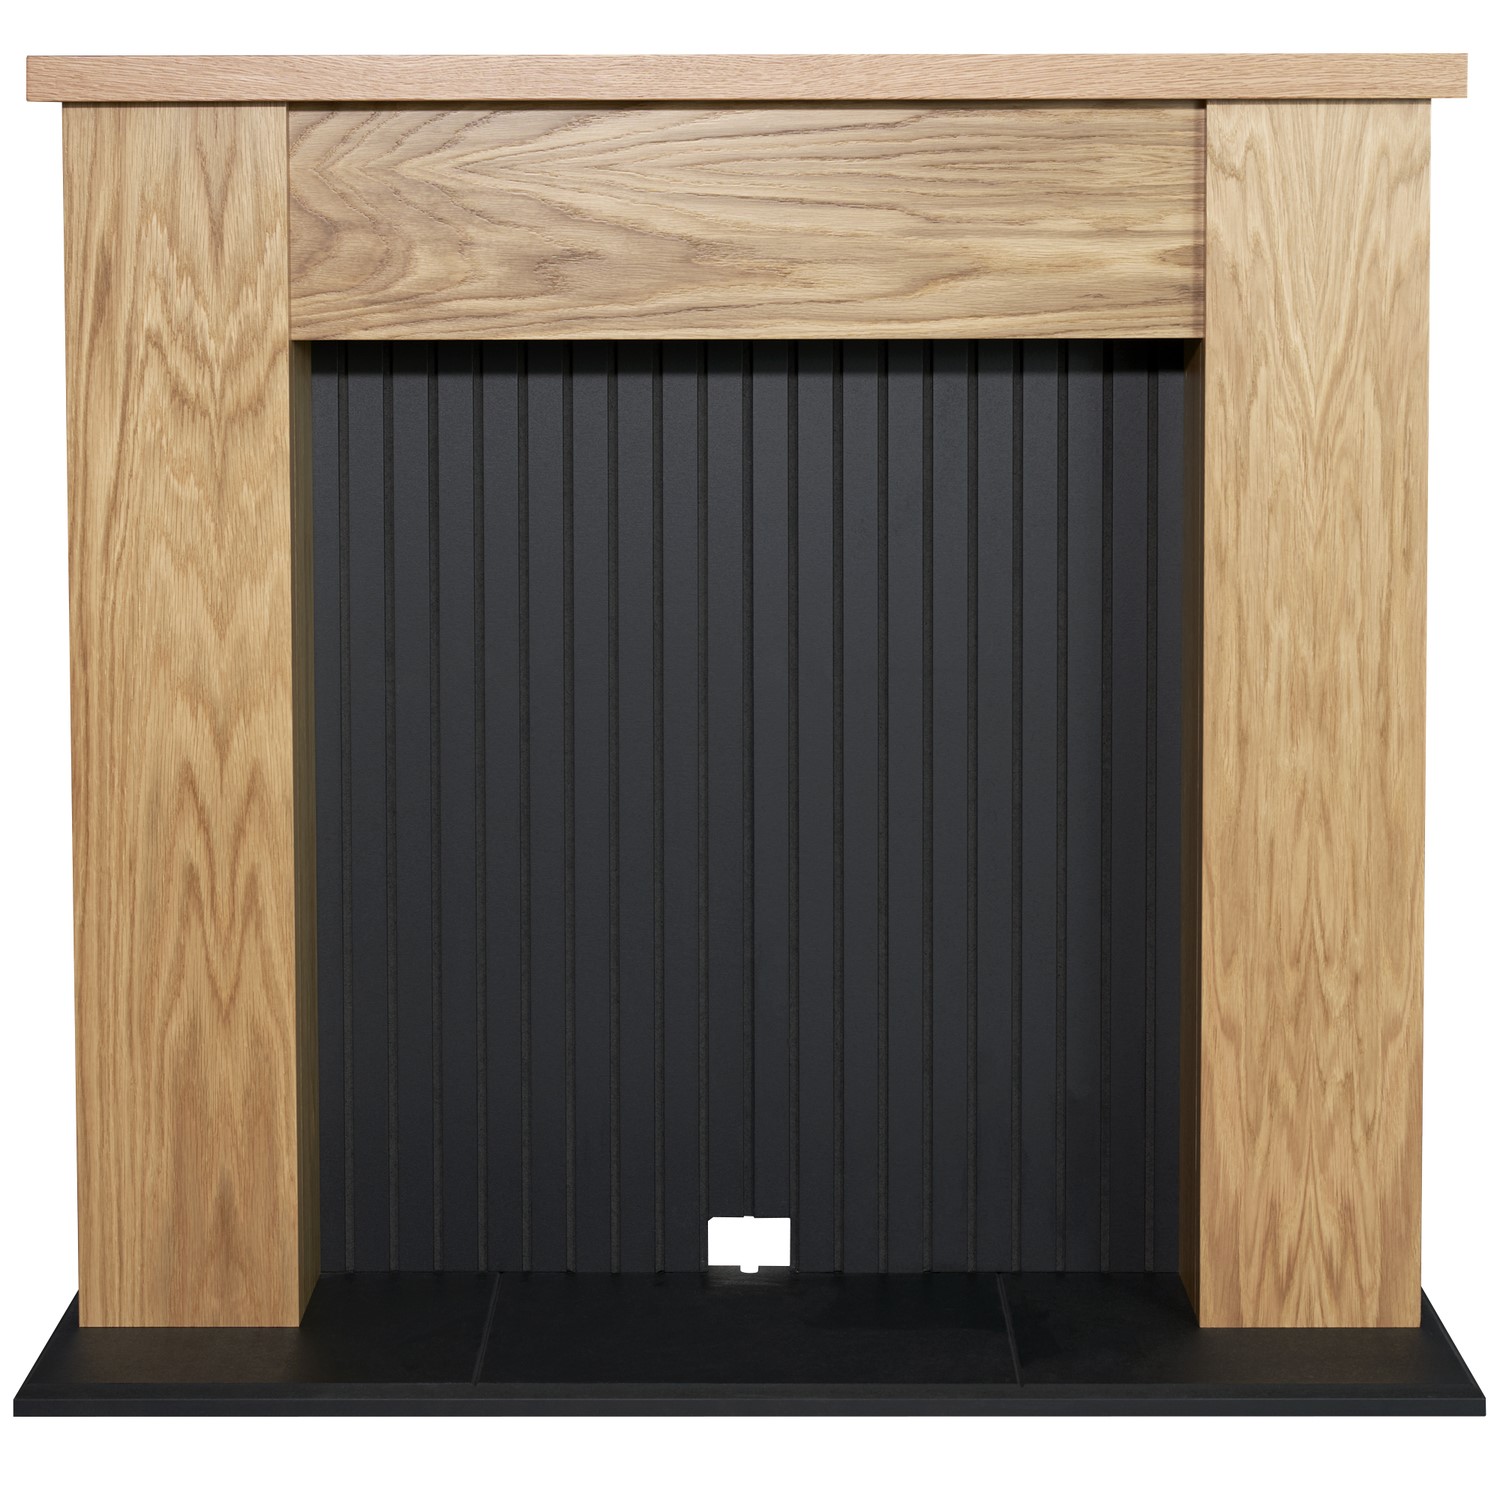 Photo of Adam stove fireplace in oak & black 48 inch - new england